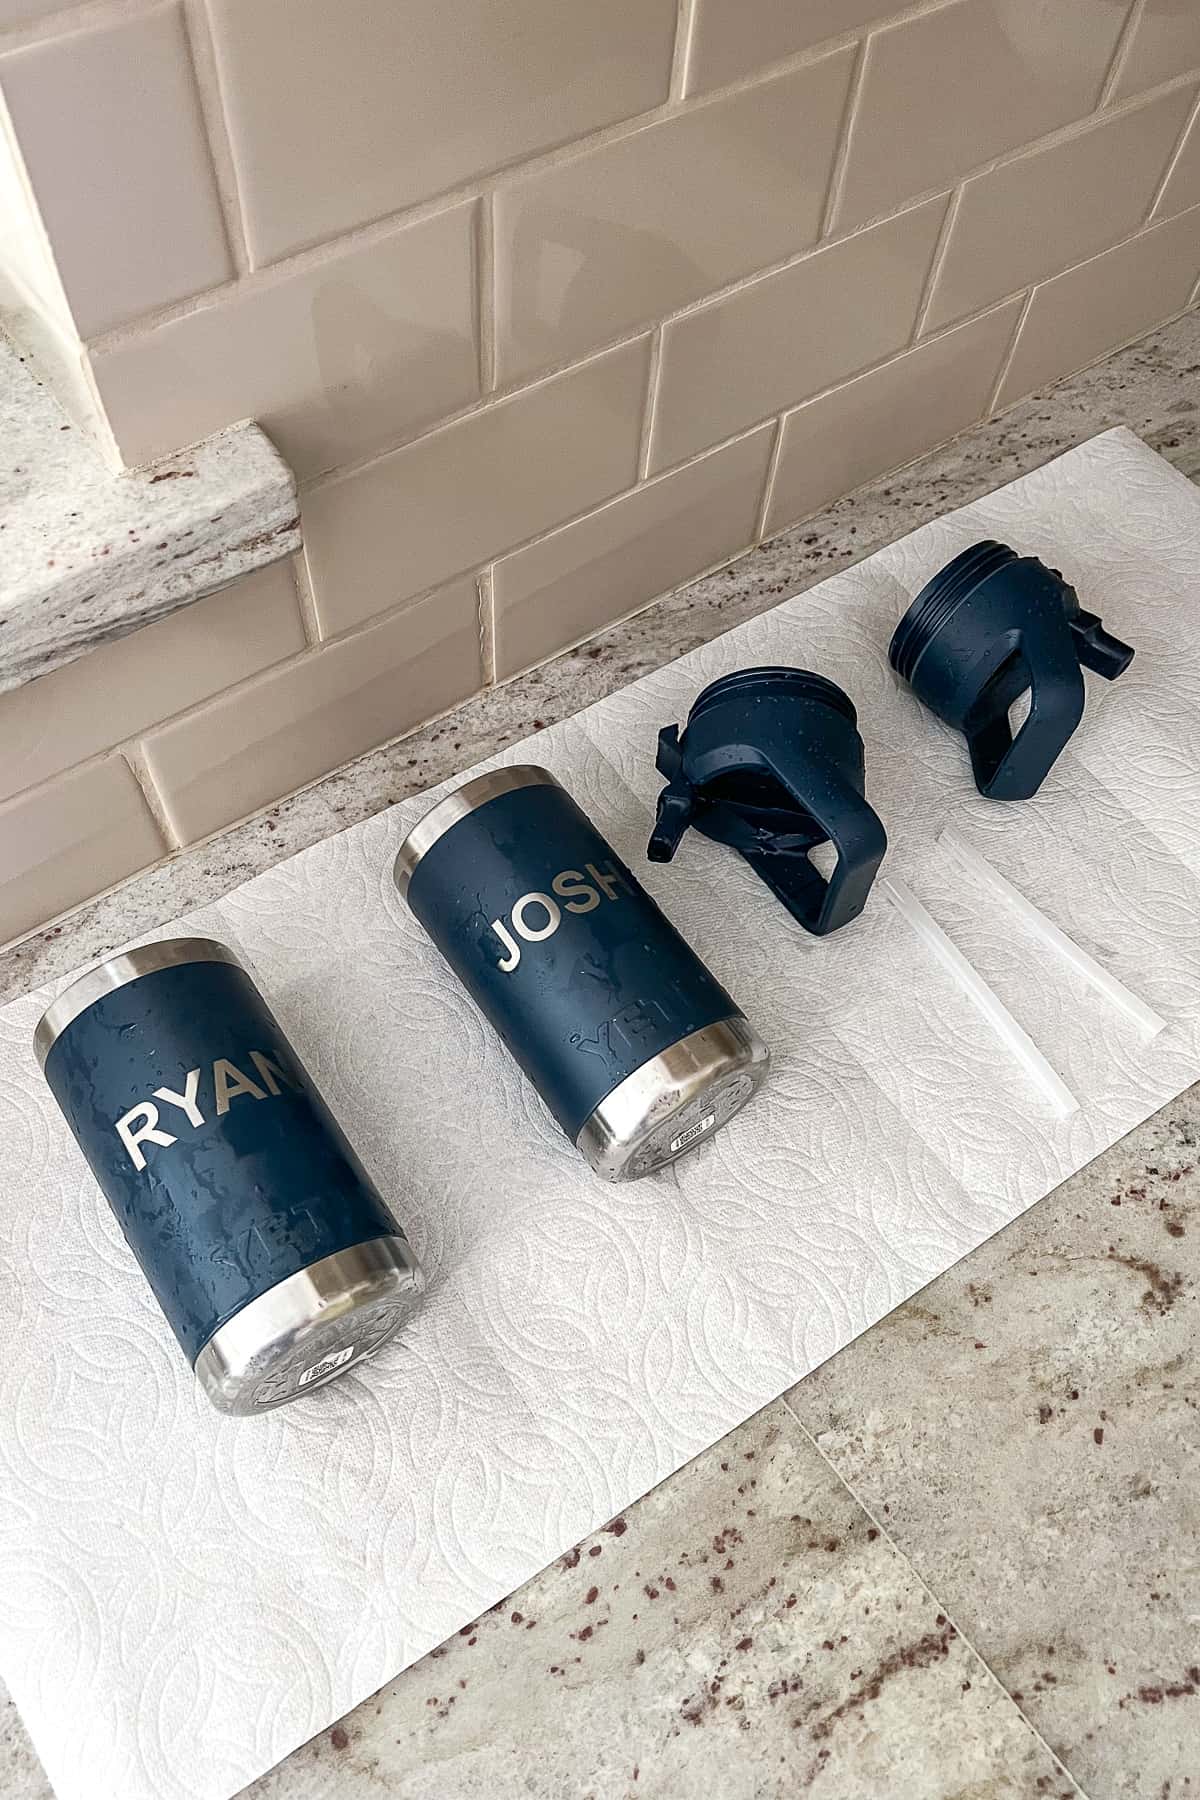 air drying stainless steel water bottles on the counter